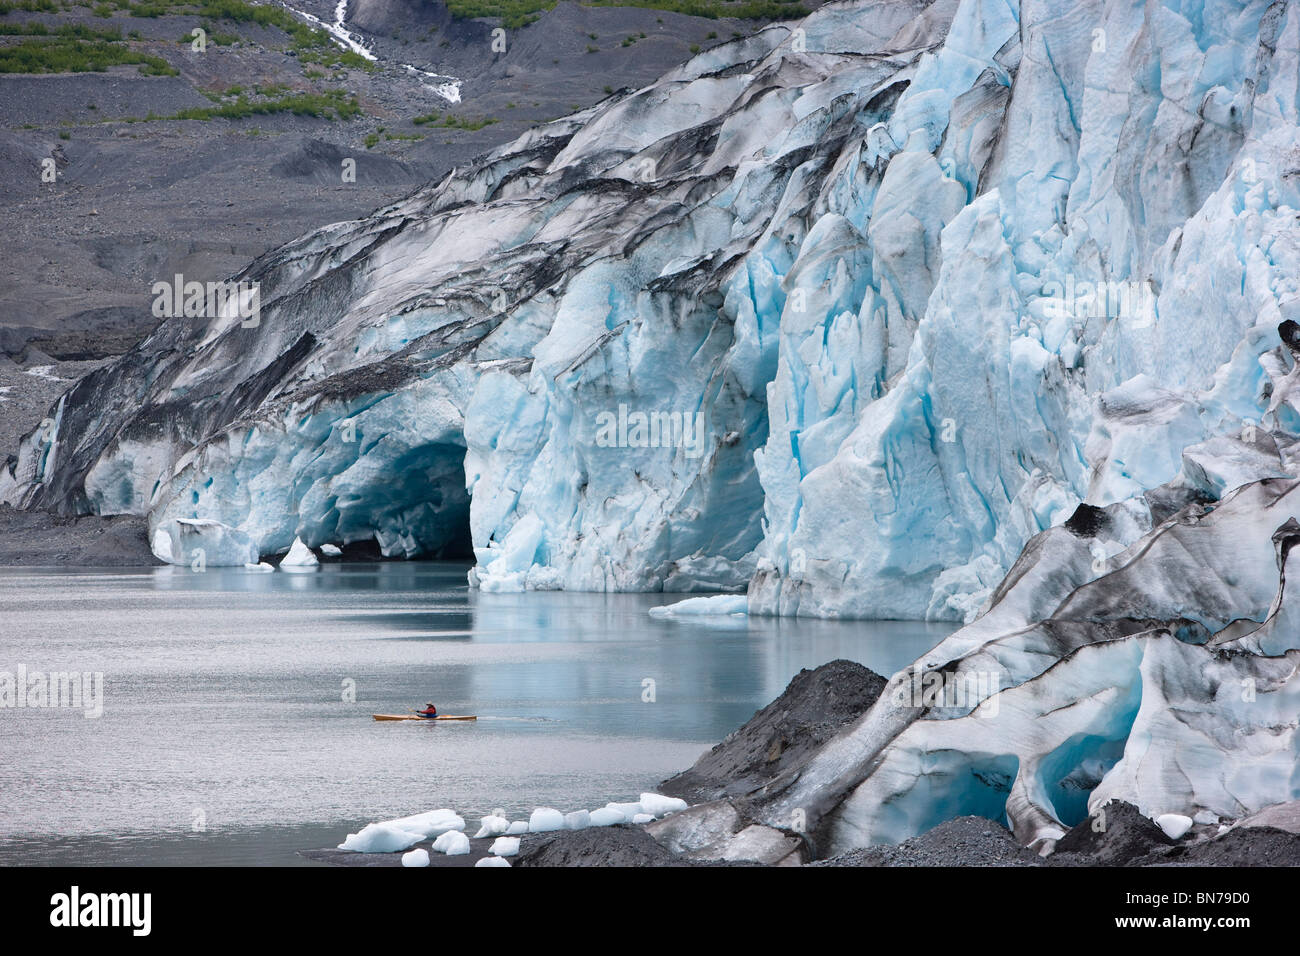 Man kayaking in Shoup Bay with Shoup Glacier in the background, Shoup Bay State Marine Park, Prince William Sound, Alaska Stock Photo